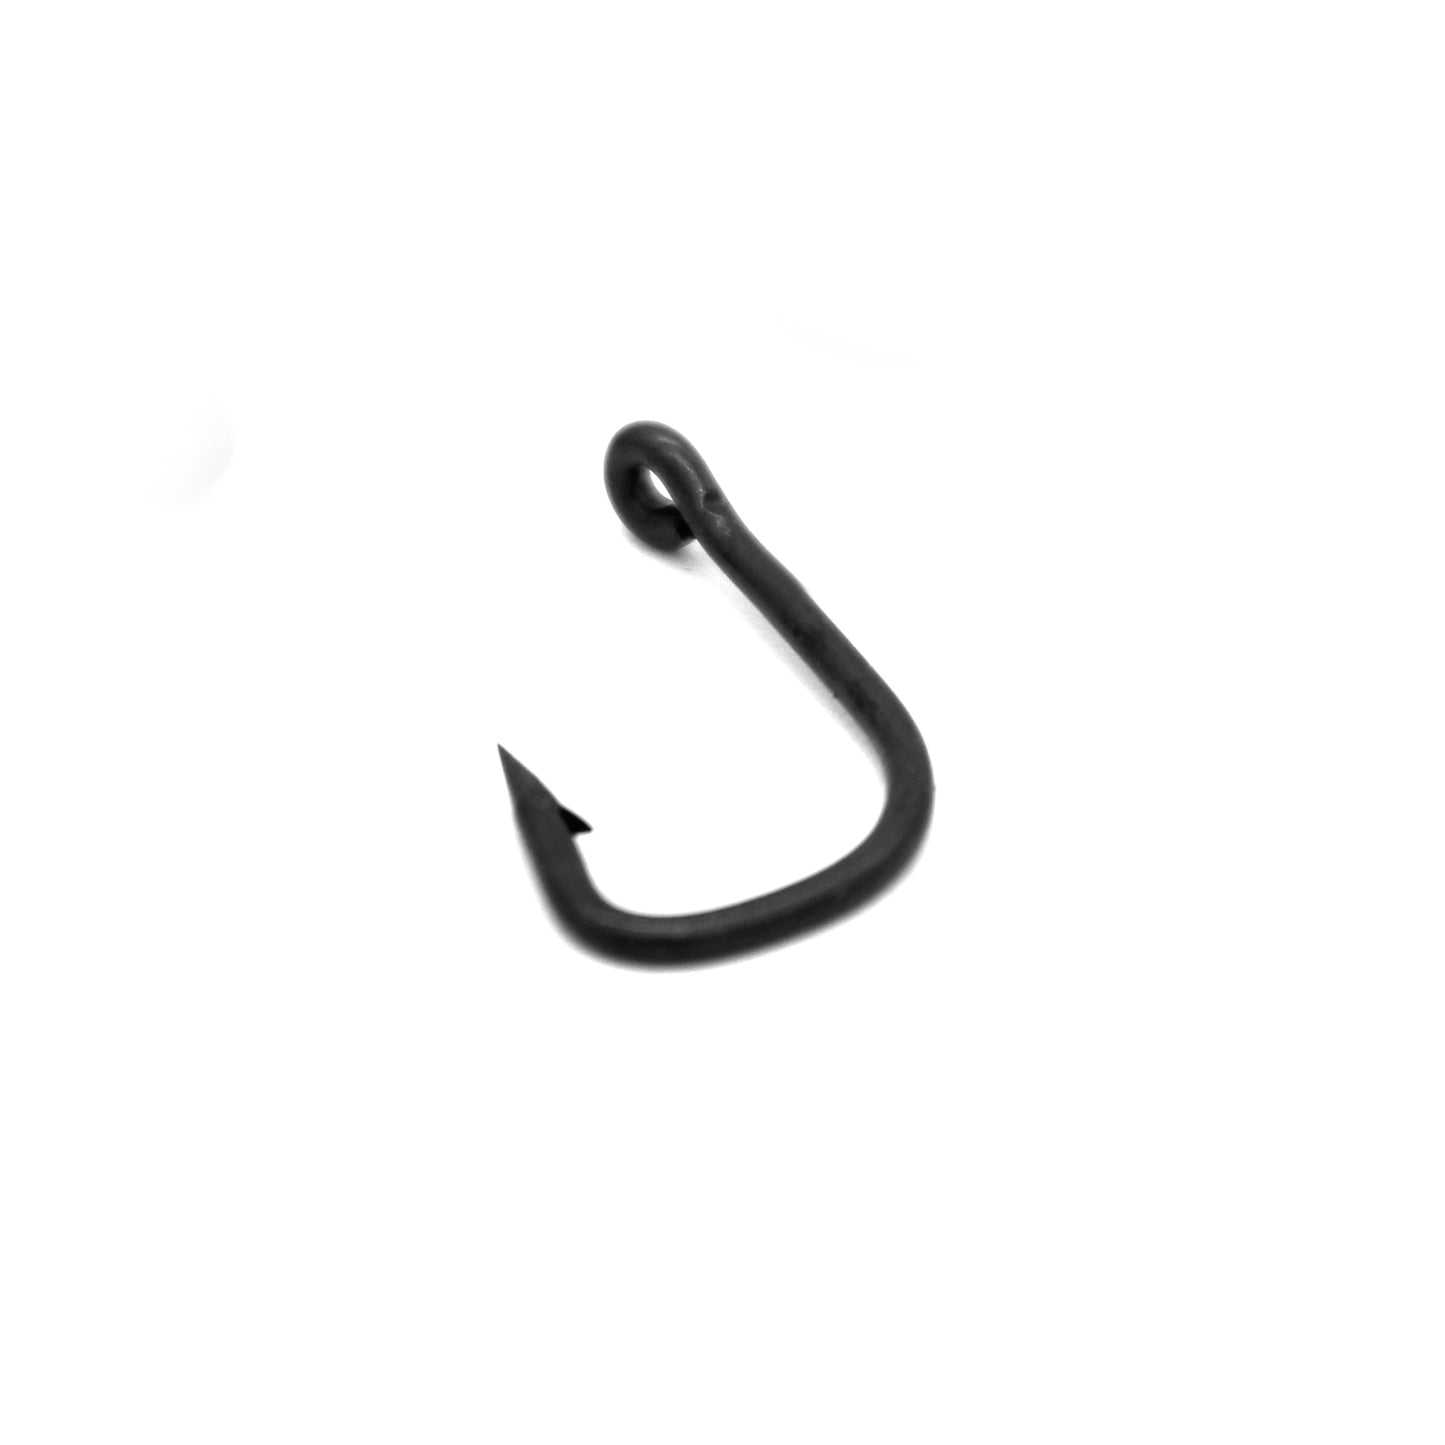 Deception Angling SWG Micro Barbed Hook for Fishing